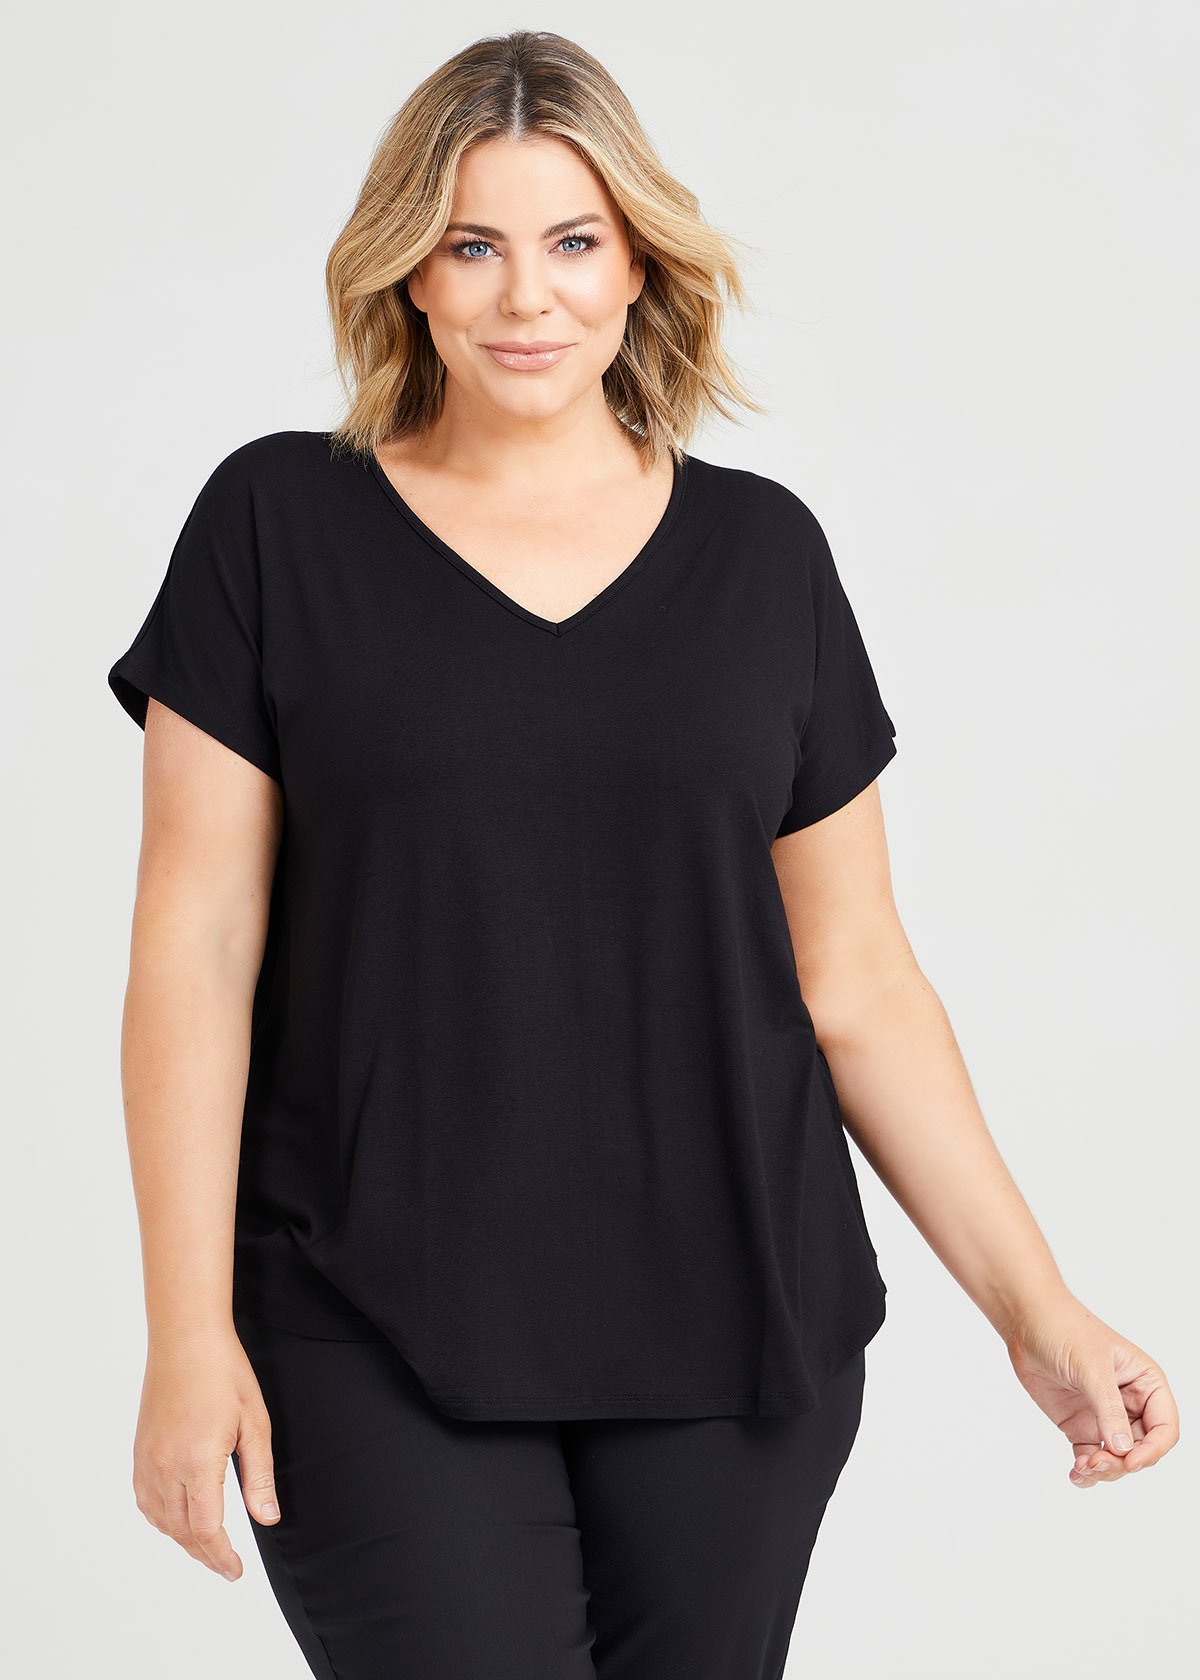 Shop Plus Size Natural Everyday V-neck Top in Black | Sizes 12-30 ...